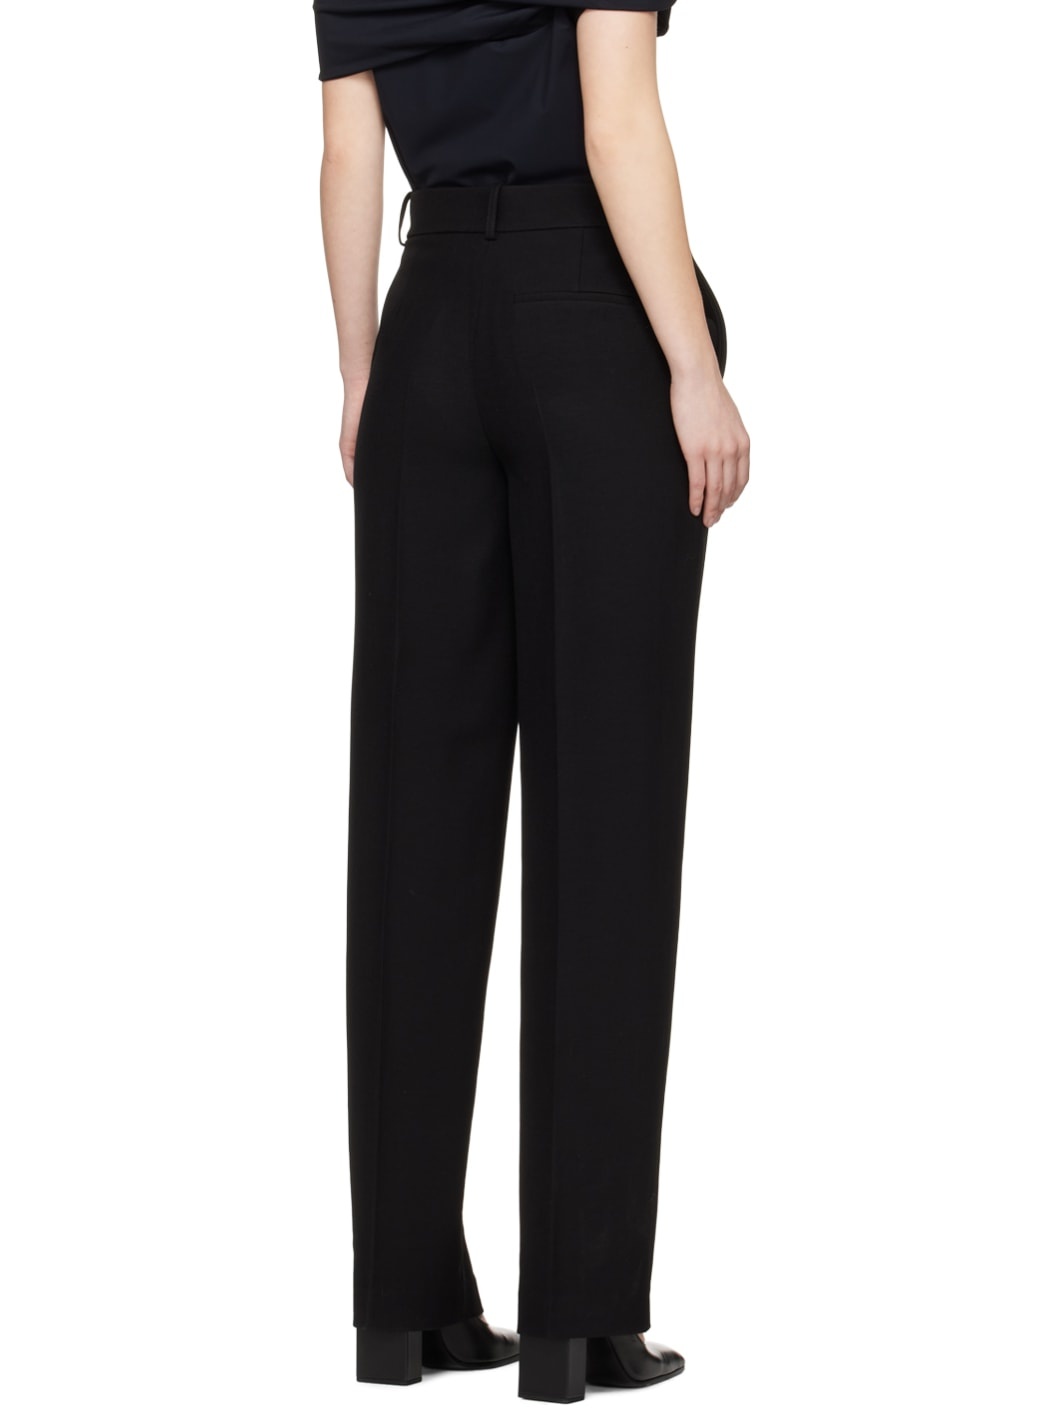 Black Tailored Trousers - 3